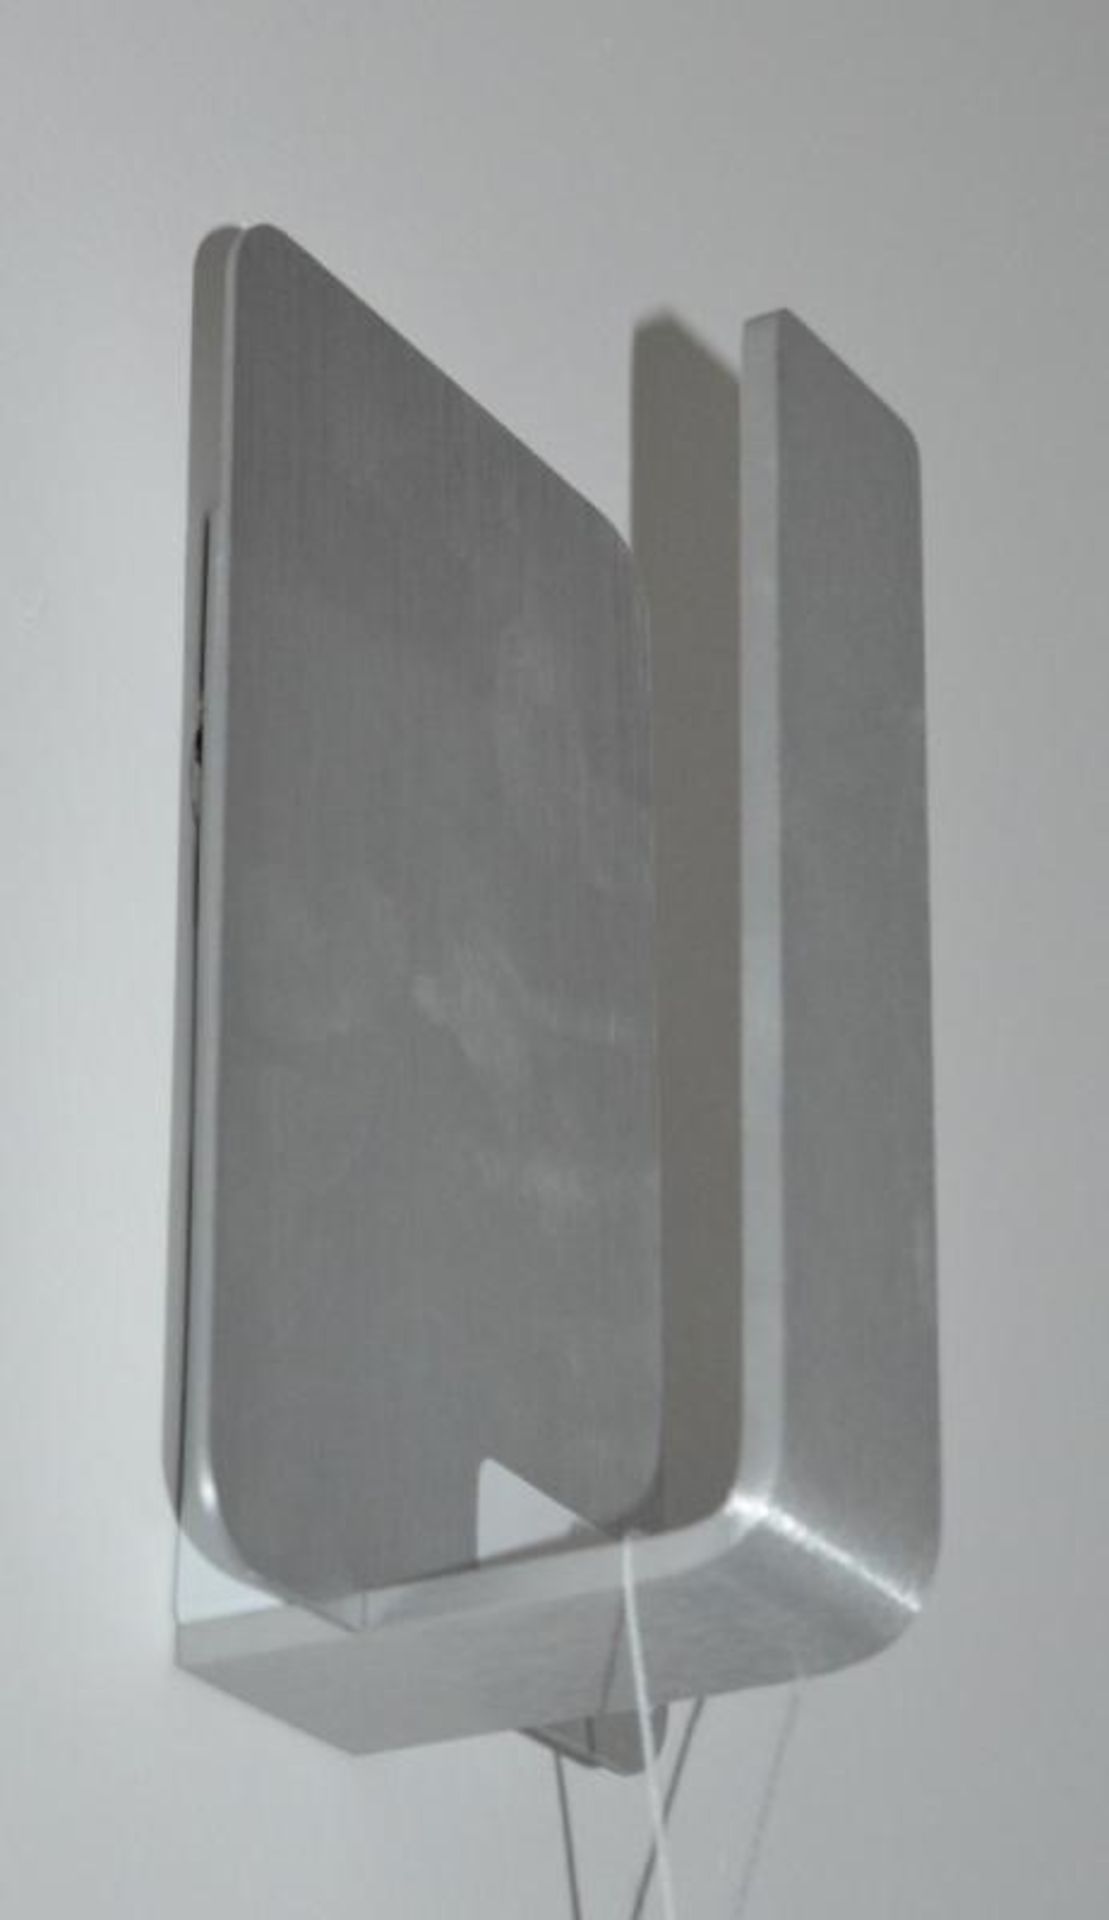 1 x Brushed Aluminium LED 5w Wall Light - Contemporary Design - Ex Display Stock - CL298 - Ref 4 - L - Image 3 of 4